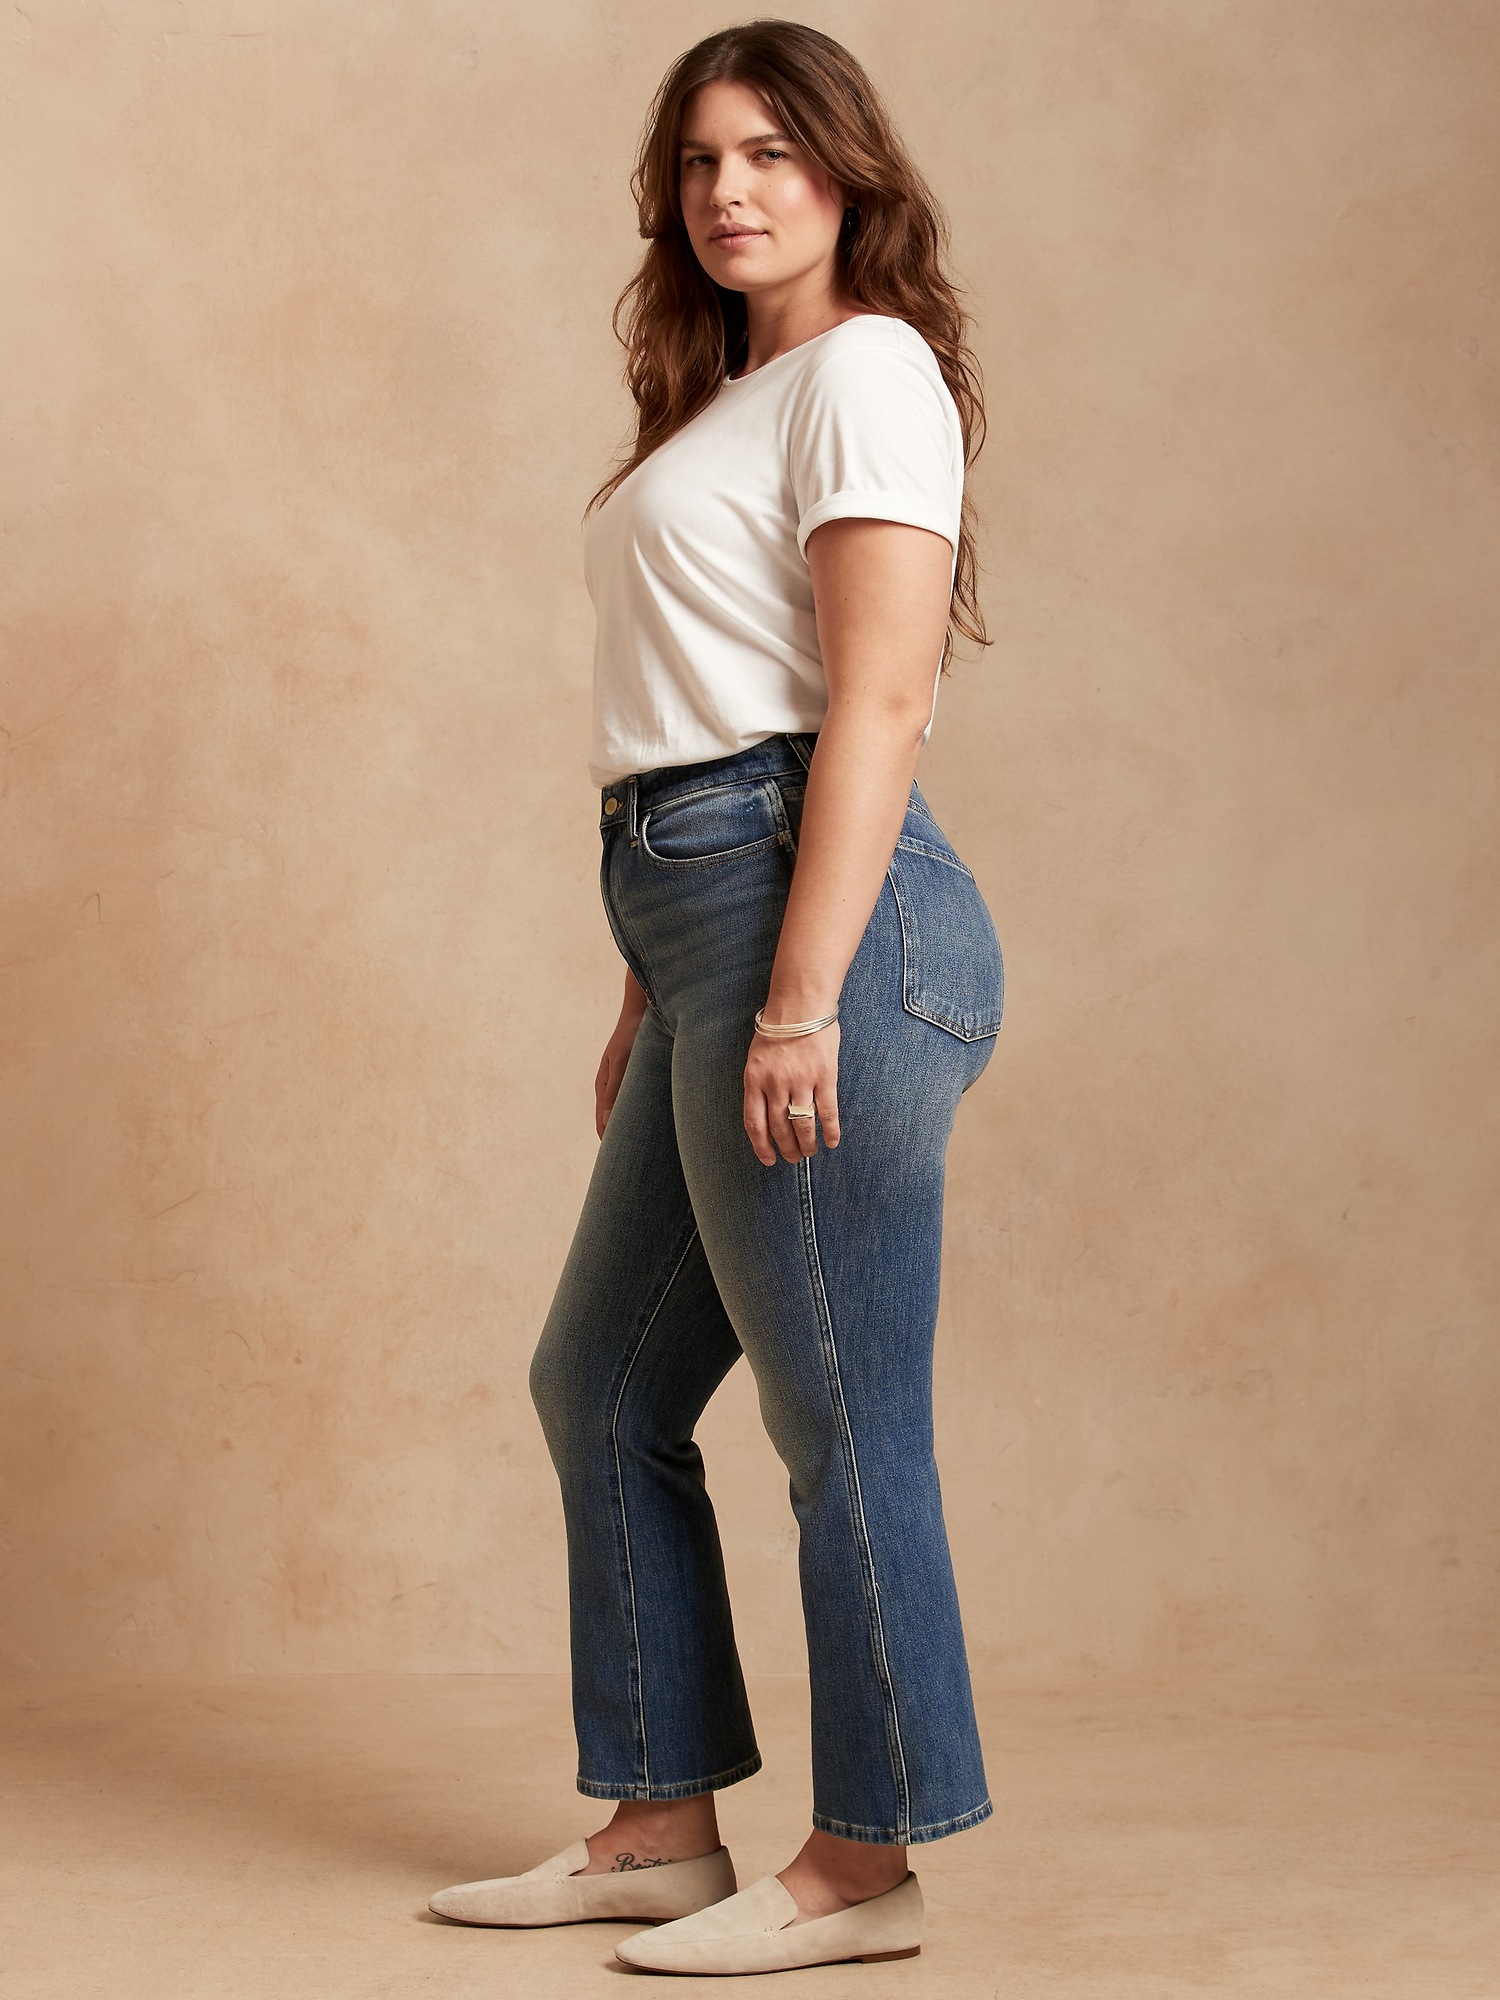 The Crop-Boot Jean